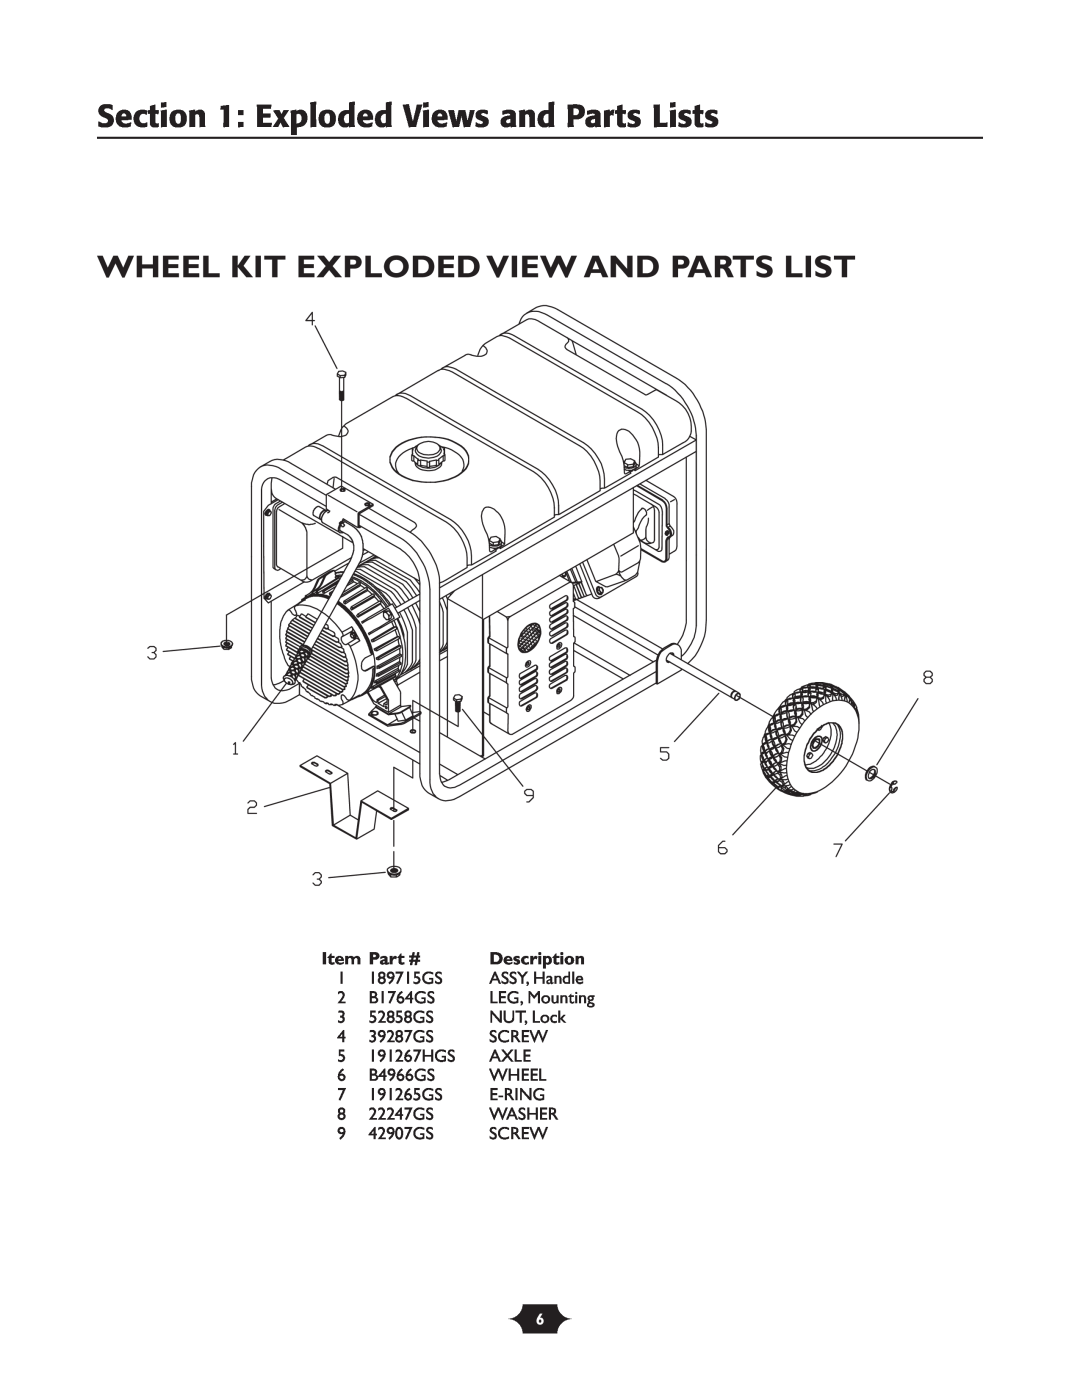 Briggs & Stratton 1919 manual Wheel Kit Exploded View And Parts List, Exploded Views and Parts Lists, Description 